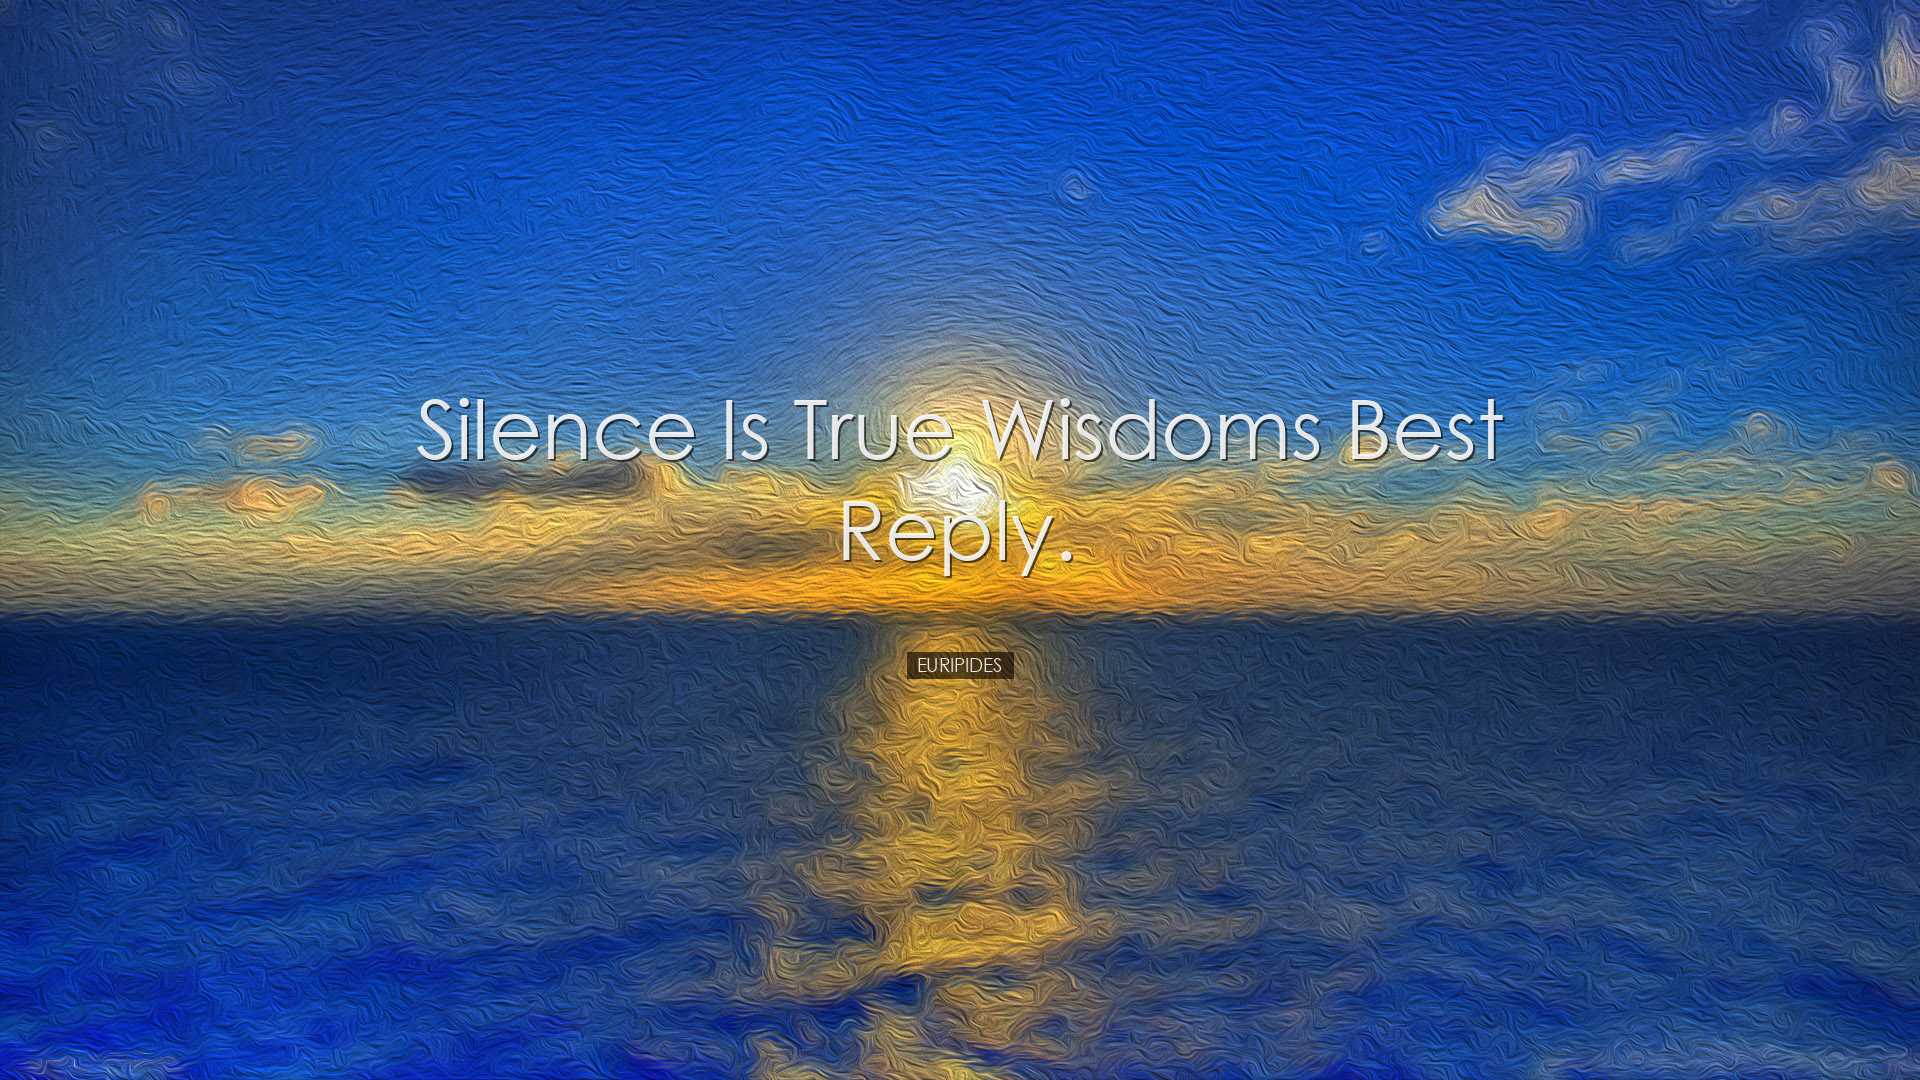 Silence is true wisdoms best reply. - Euripides